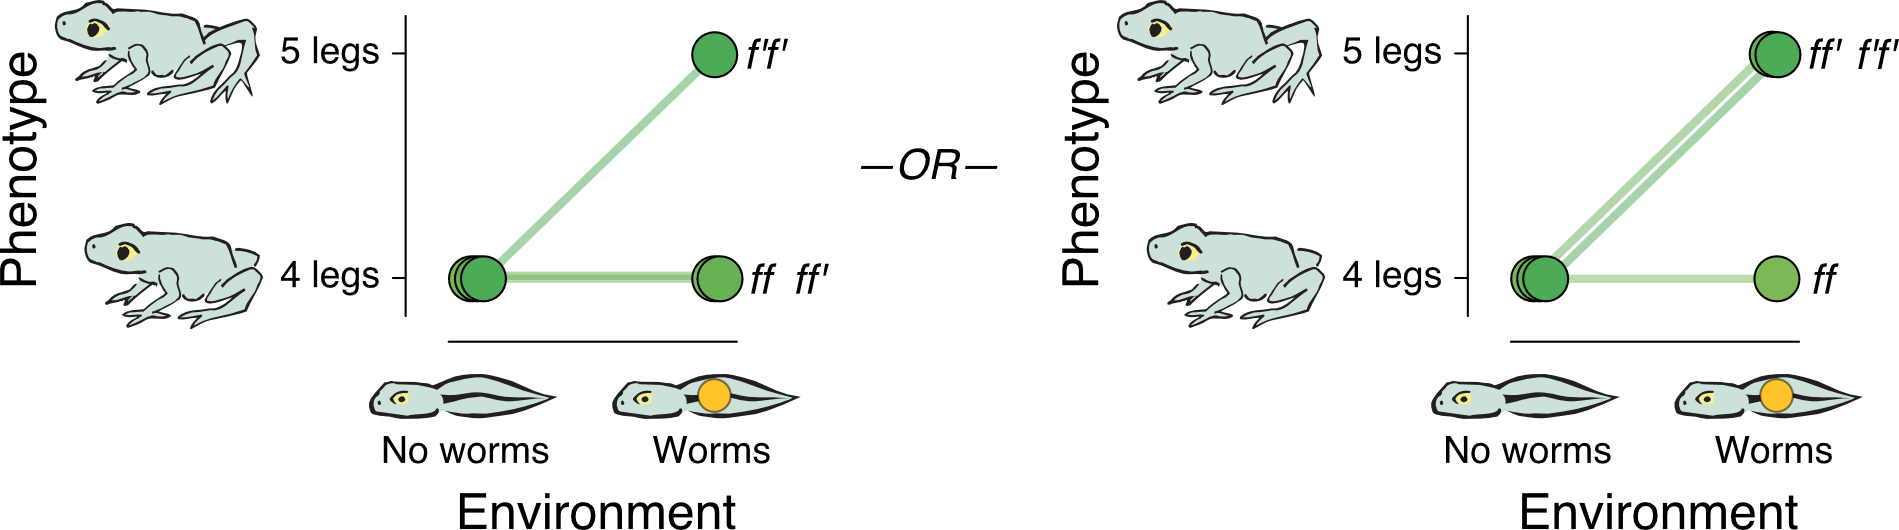 A pair of reaction norm graphs side-by-side, both with the same axes. Vertical axis is Phenotype, with values 4 legs and 5 legs. Each value is illustrated with a cartoon frog. Horizontal axis is Environment, with values No worms and Worms. Each value is illustrated with a cartoon tadpole. The tadpole illustrating the Worms value has an orange dot on it. The field of the graph has three pairs of dots, labeled f f, f f-prime, and f-prime f-prime. One dot in each pair is above the No worms value on the enviroment axis and the other is above the Worms value. The dots in each pair are connected by line segments. In the first graph, dot pairs ff and f f-prime indicate a phenotype of 4 legs in the No worms environment and a phenotype of 4 legs in the Worms environment, while the dot pair f-prime f-prime indicates a phenotype of 4 legs in the no worms environment and 5 legs in the worms environment. In the second graph, dot pair ff indicates a phenotype of 4 legs in the No worms environment and a phenotype of 4 legs in the Worms environment, while the dot pairs f f-prime and f-prime f-prime indicate a phenotype of 4 legs in the no worms environment and 5 legs in the worms environment.